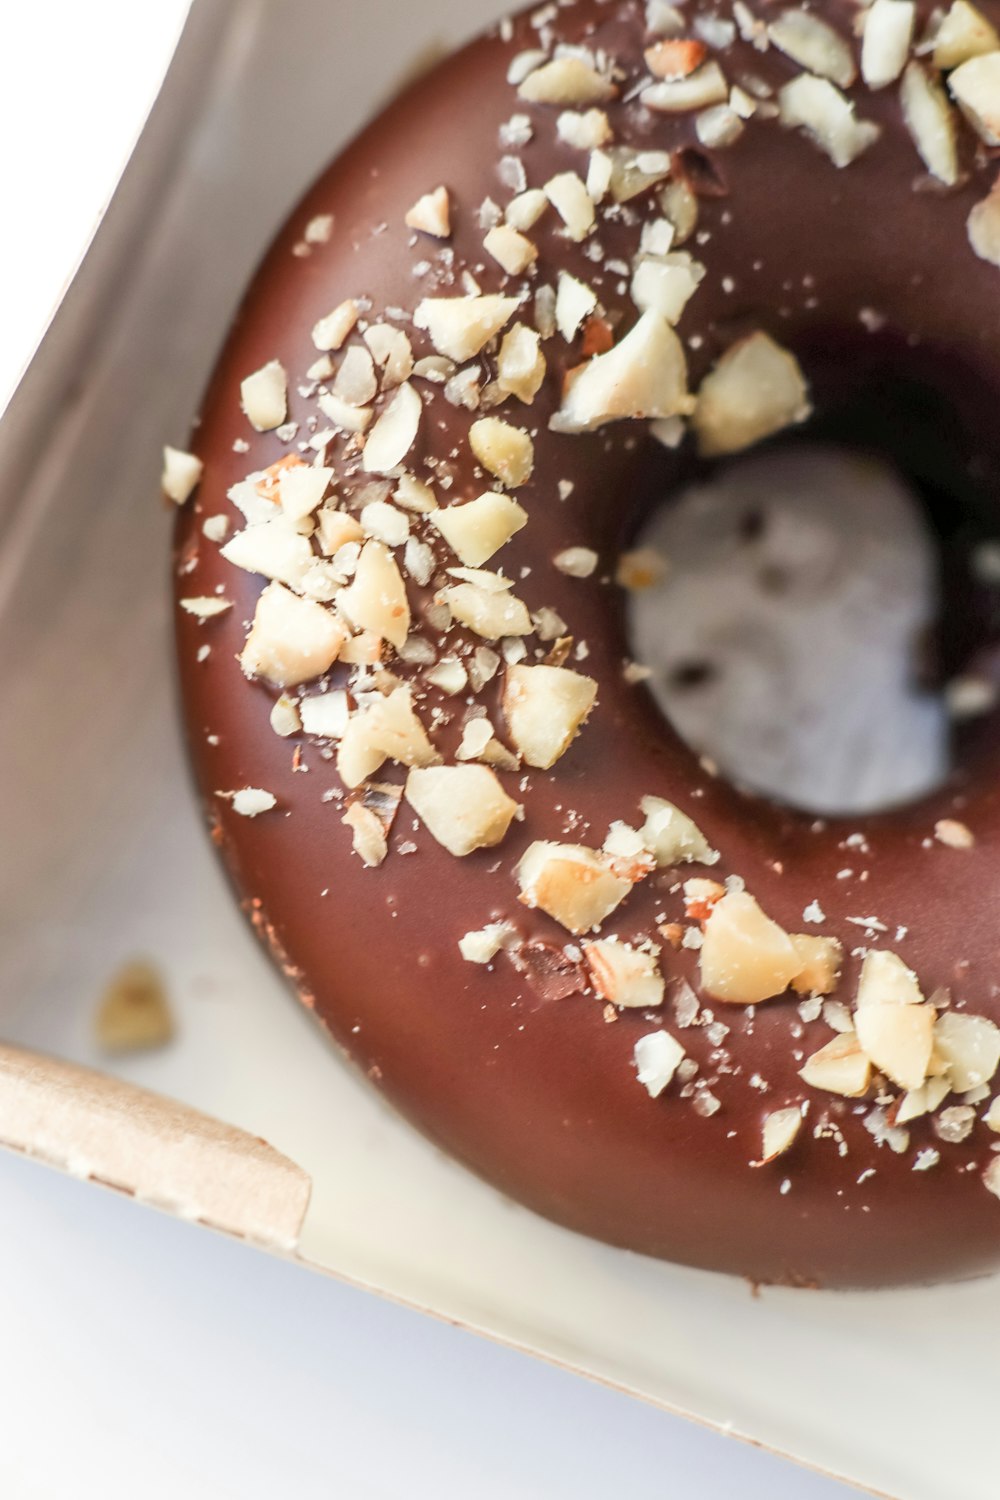 a chocolate donut with nuts and a bite taken out of it